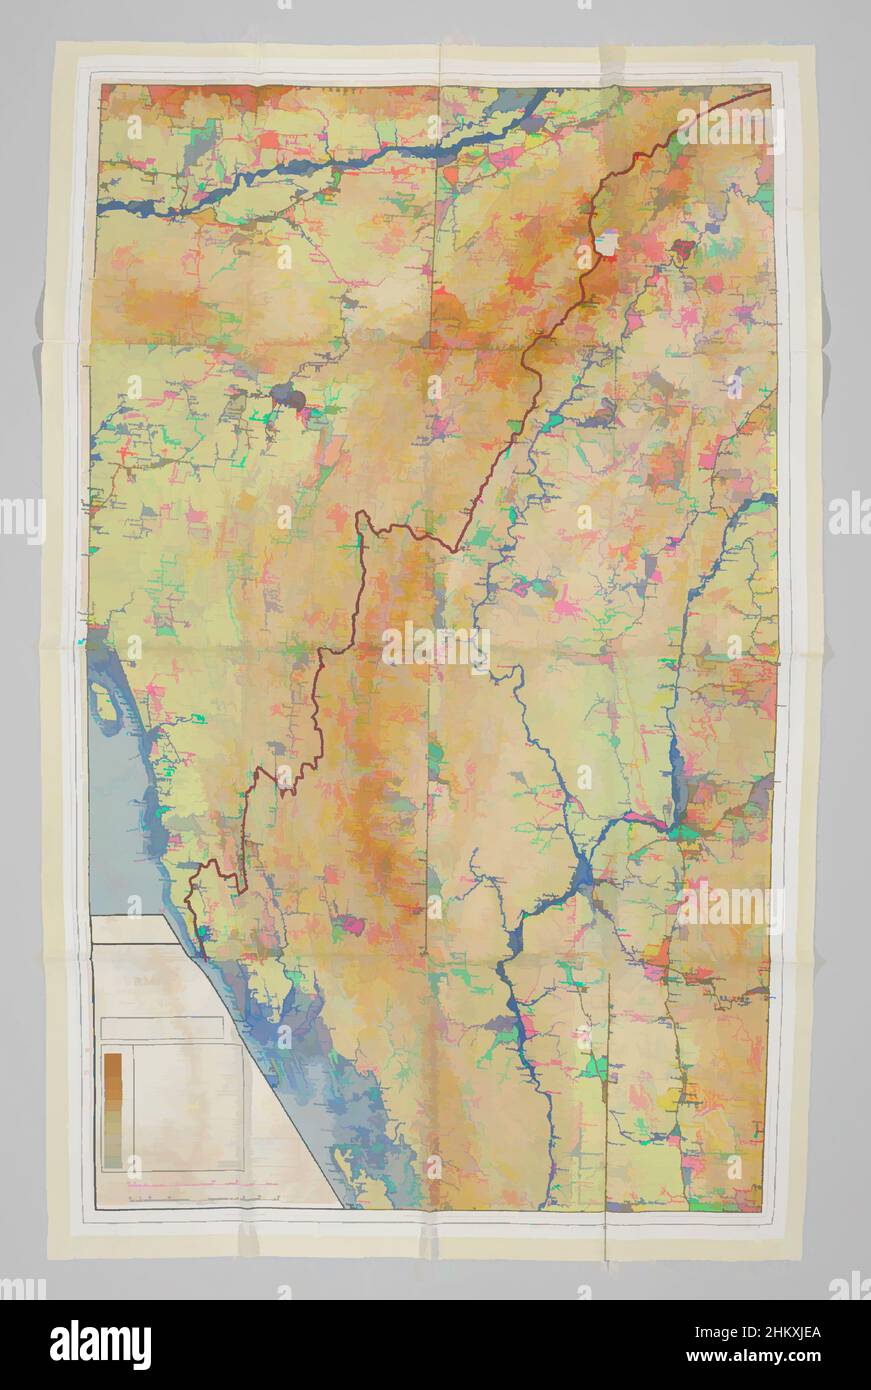 Art inspired by Silk map used as a pilot's scarf, Silk map from the British Air Force (RAF). The fabric is printed on both sides with the maps, 44 A and 44 B of Burma, part of French Indo China, part of Siam, now Thailand, part of India and part of China. The silk maps were intended for, Classic works modernized by Artotop with a splash of modernity. Shapes, color and value, eye-catching visual impact on art. Emotions through freedom of artworks in a contemporary way. A timeless message pursuing a wildly creative new direction. Artists turning to the digital medium and creating the Artotop NFT Stock Photo